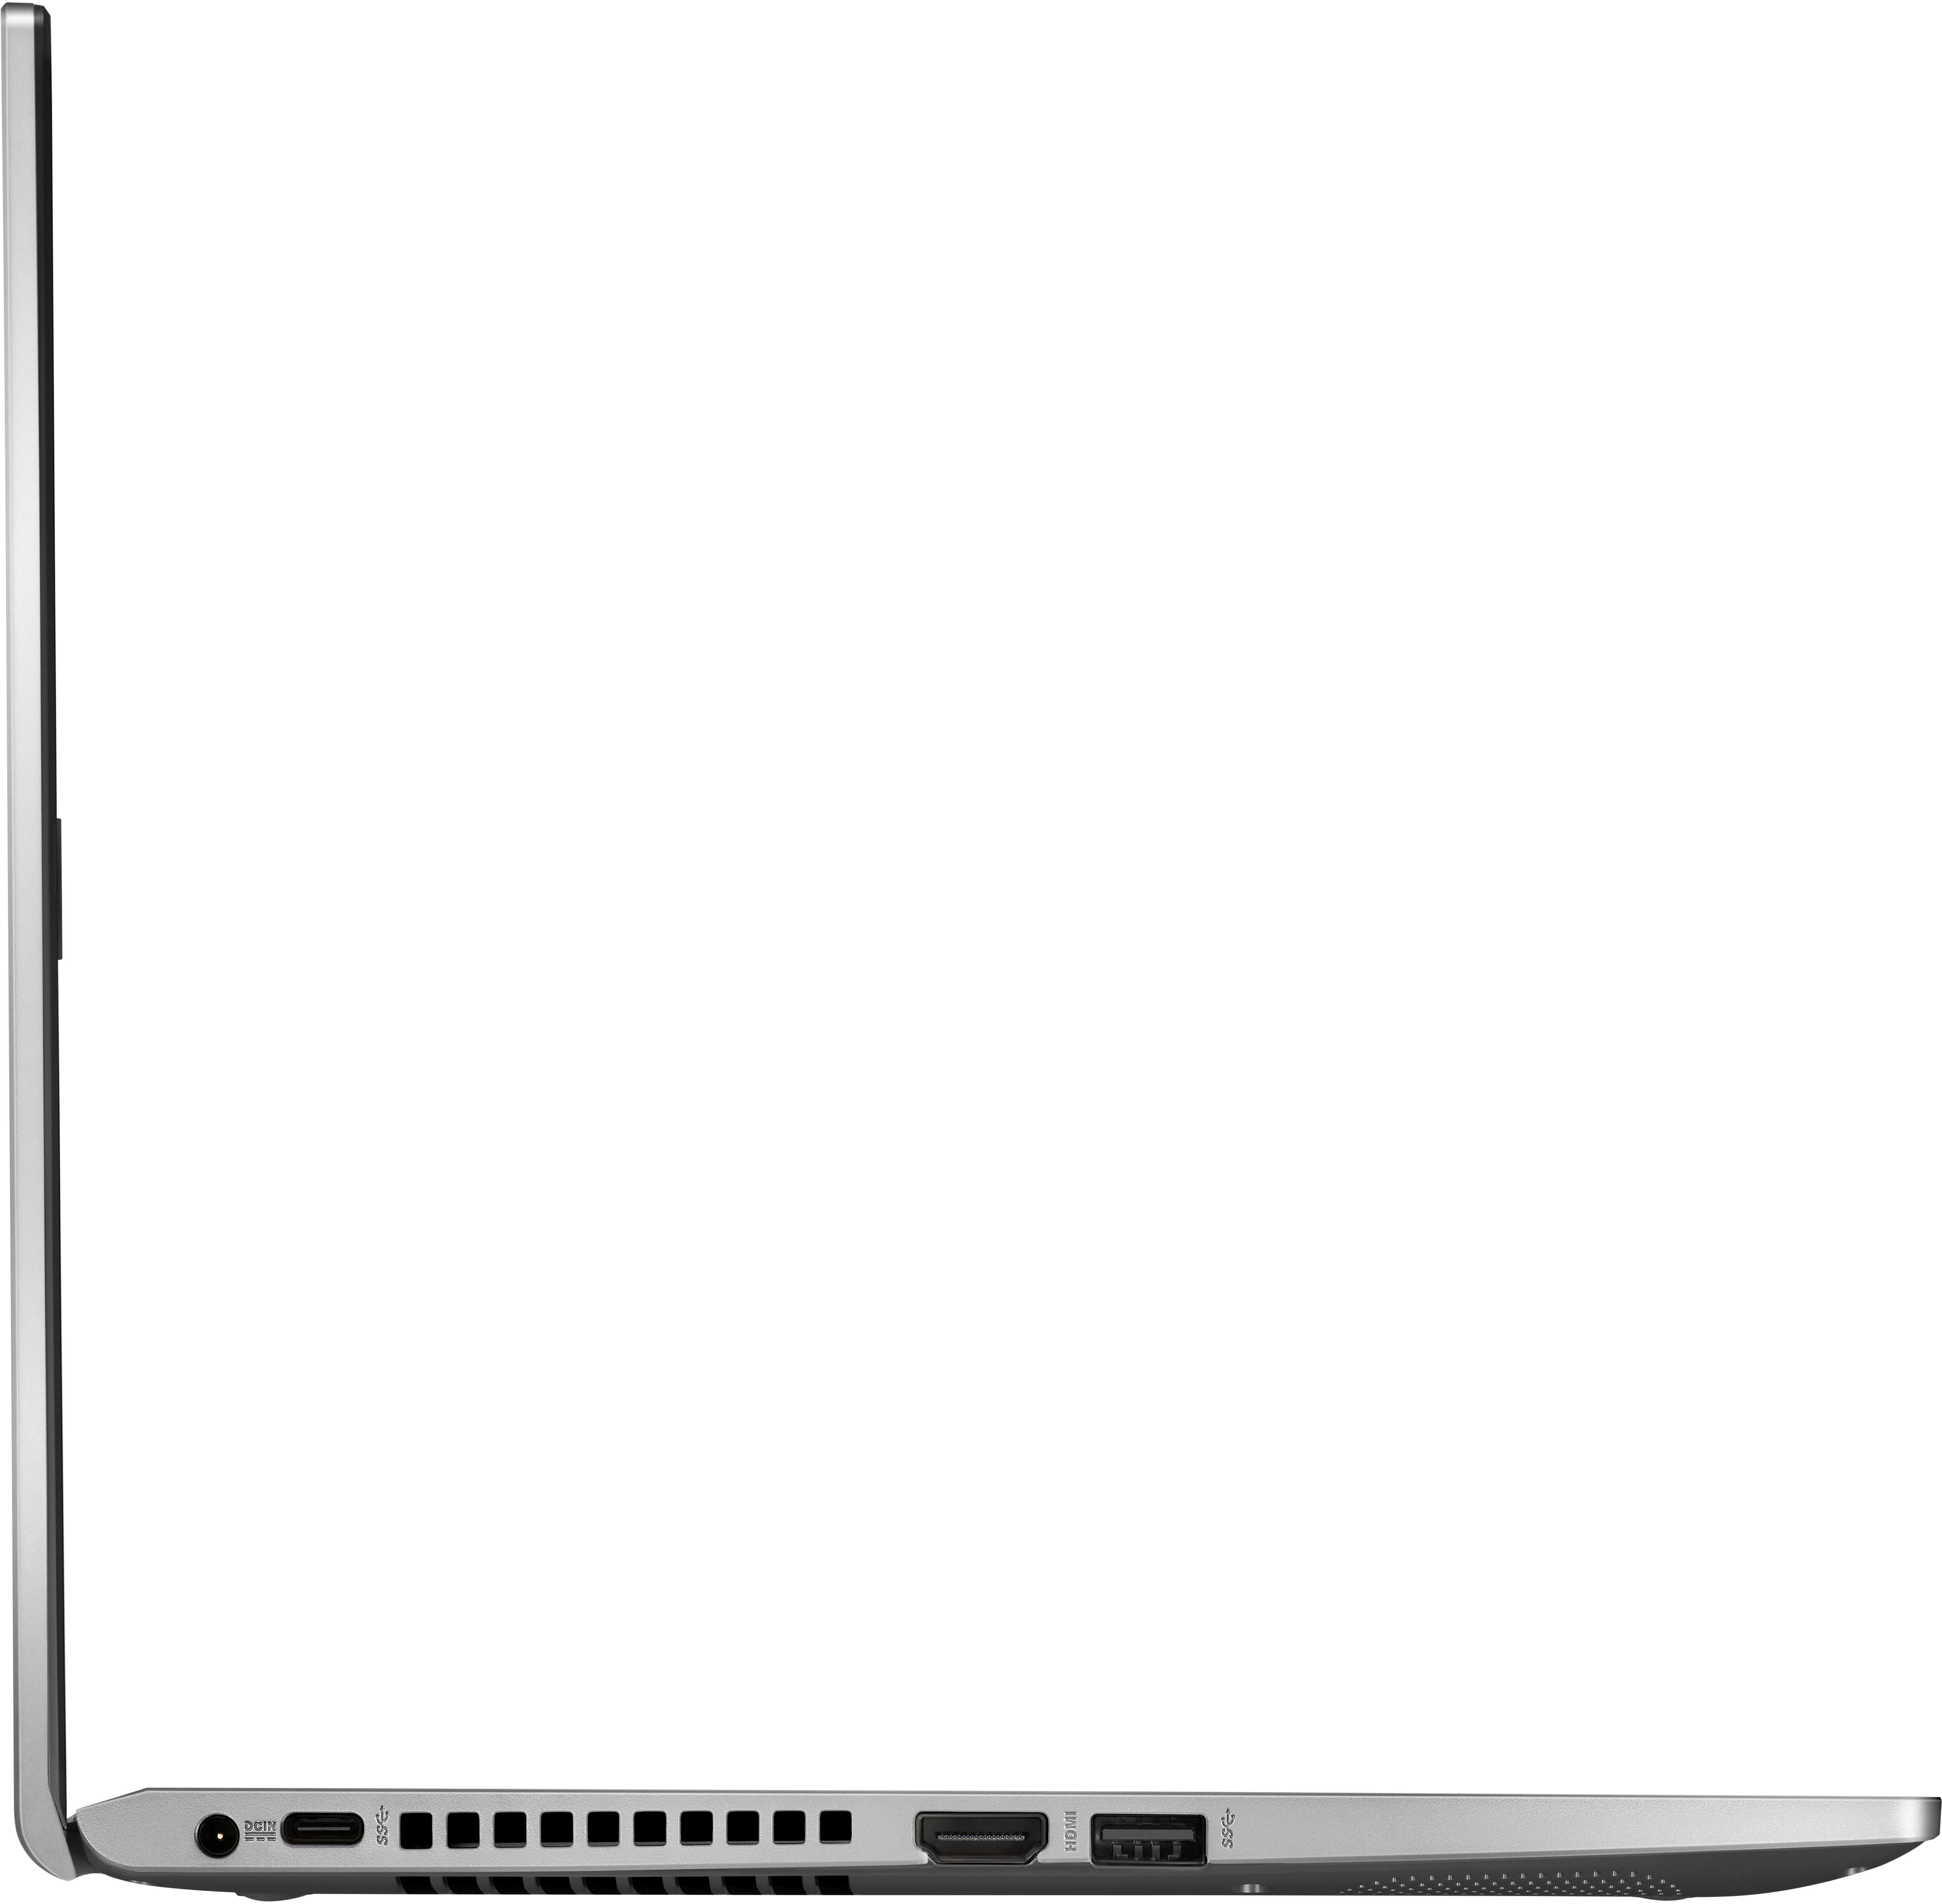 Asus - VivoBook 14 Laptop - Intel Core 11th Gen i3 with 8GB Memory - 128GB SSD - Transparent Silver